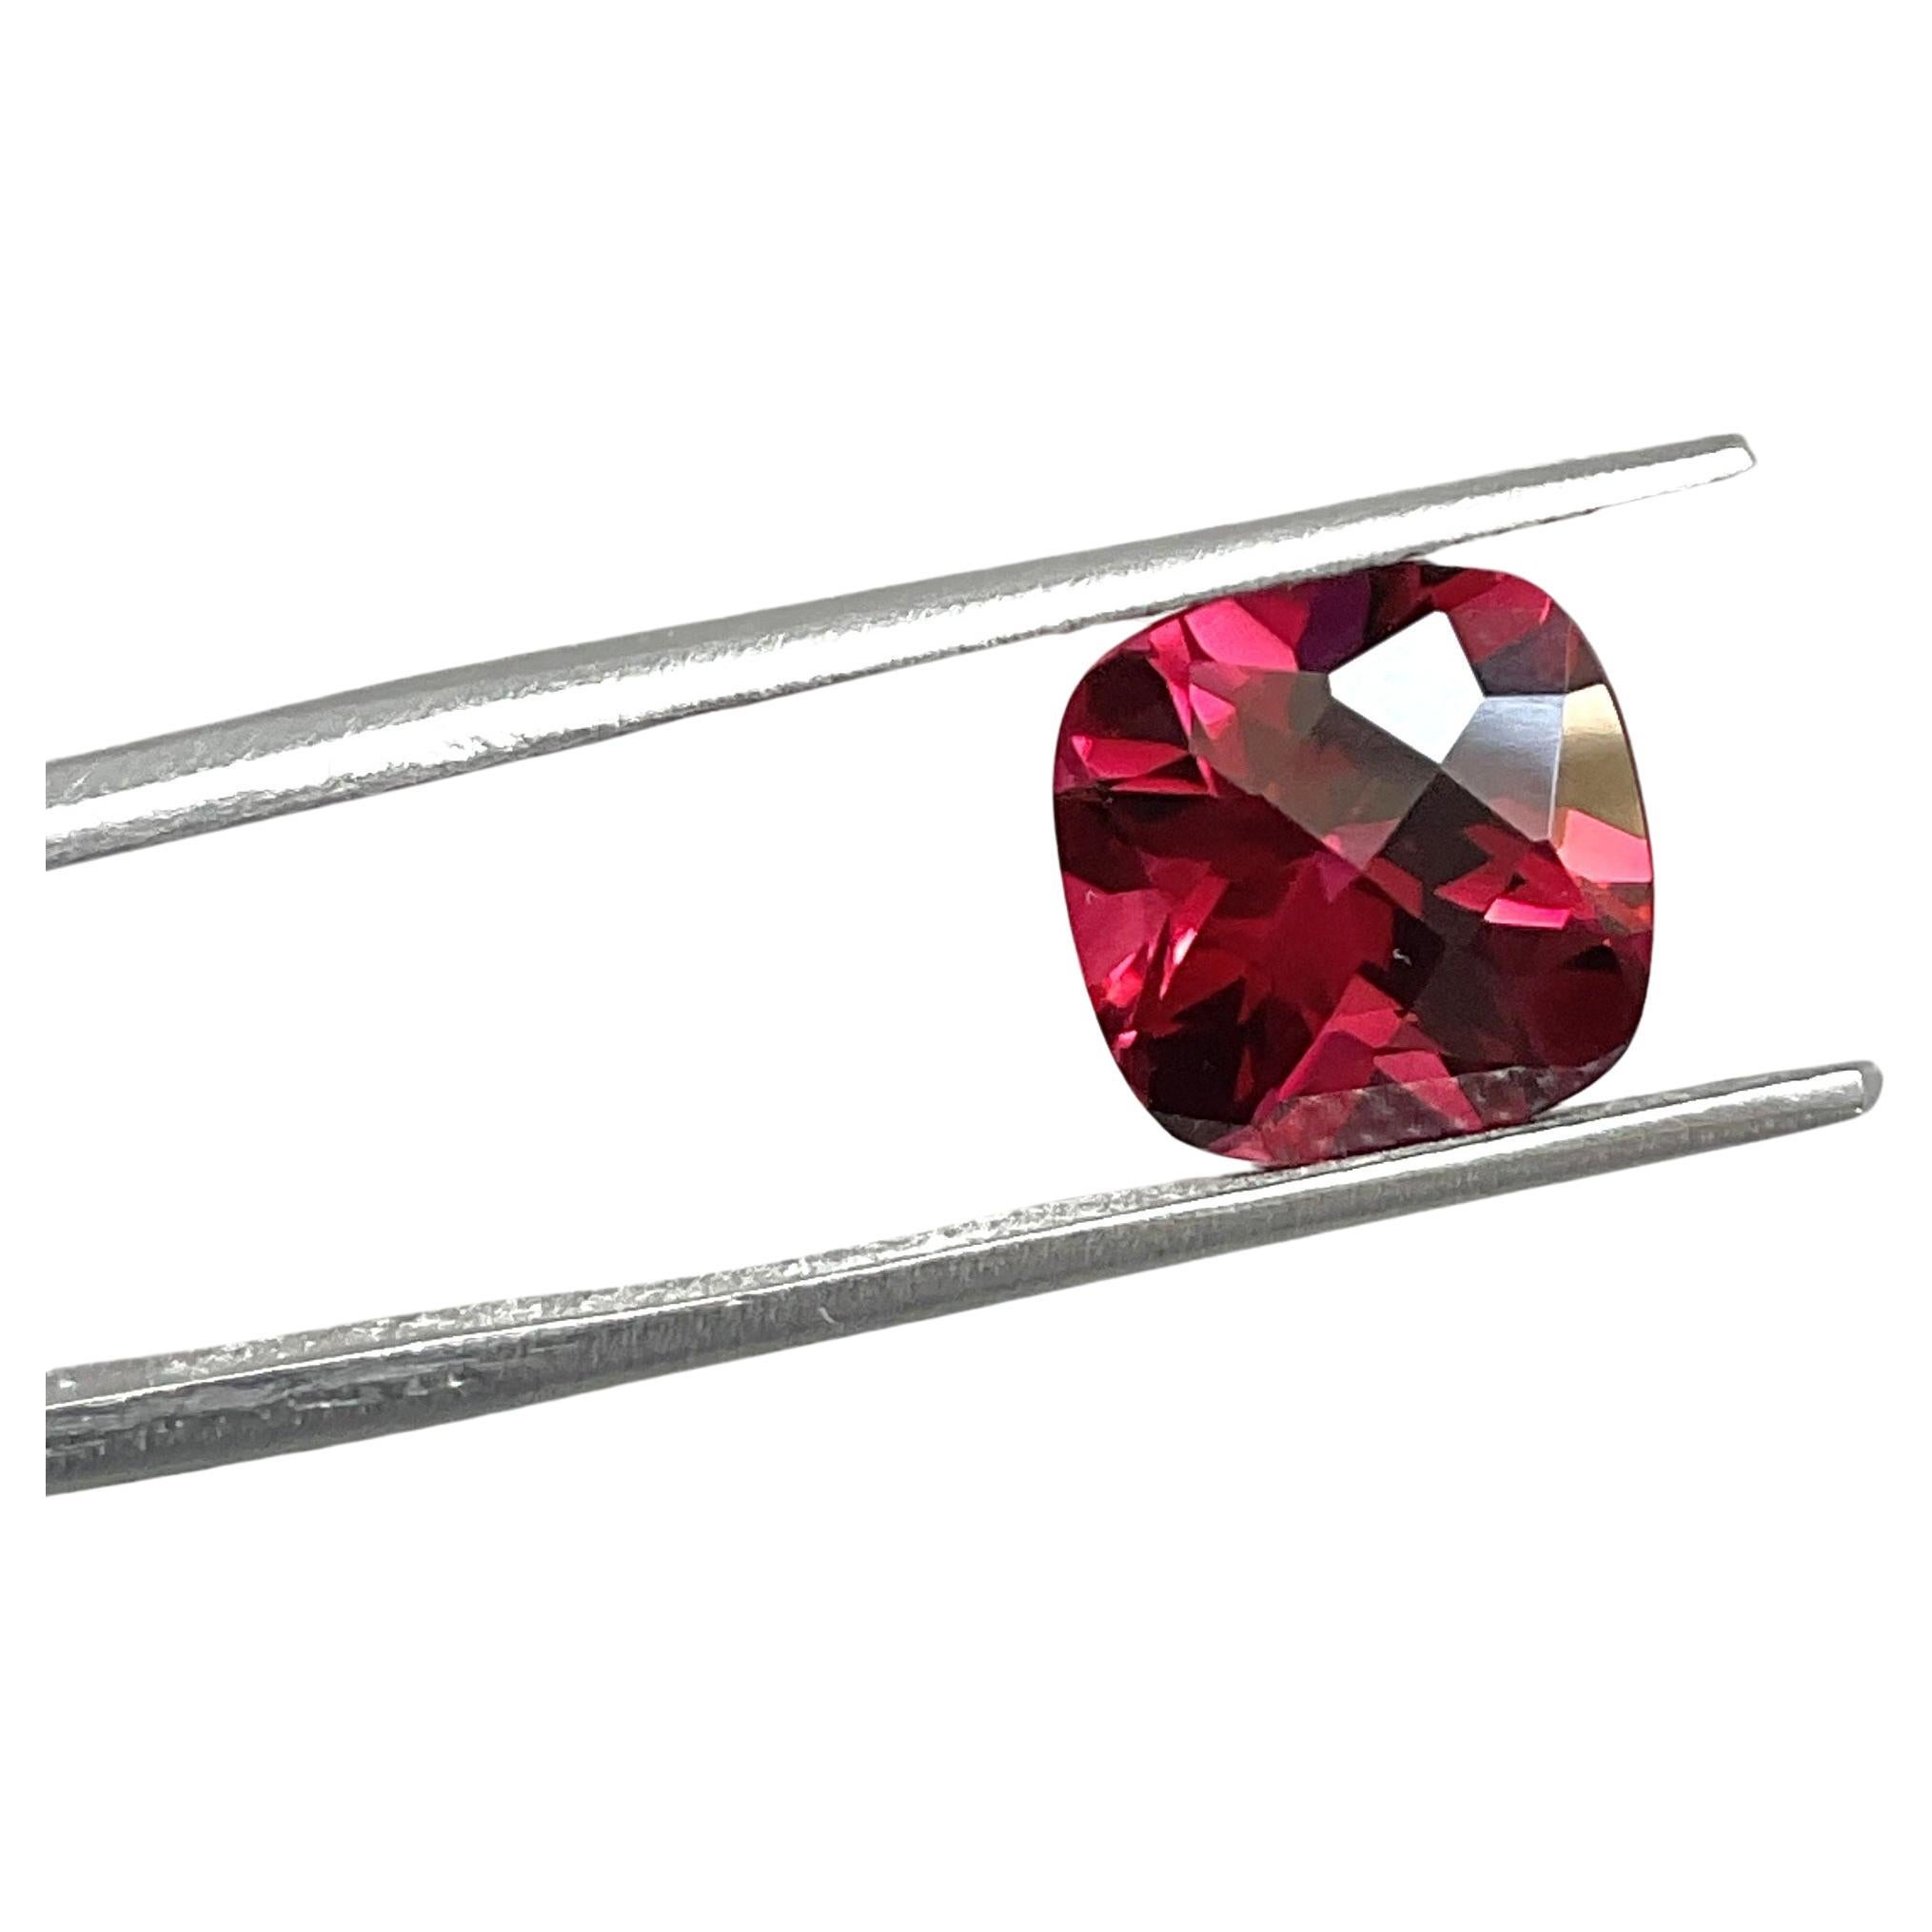 4.15 carats natural red rubellite tourmaline cushion cut louple clean gemstone For Sale